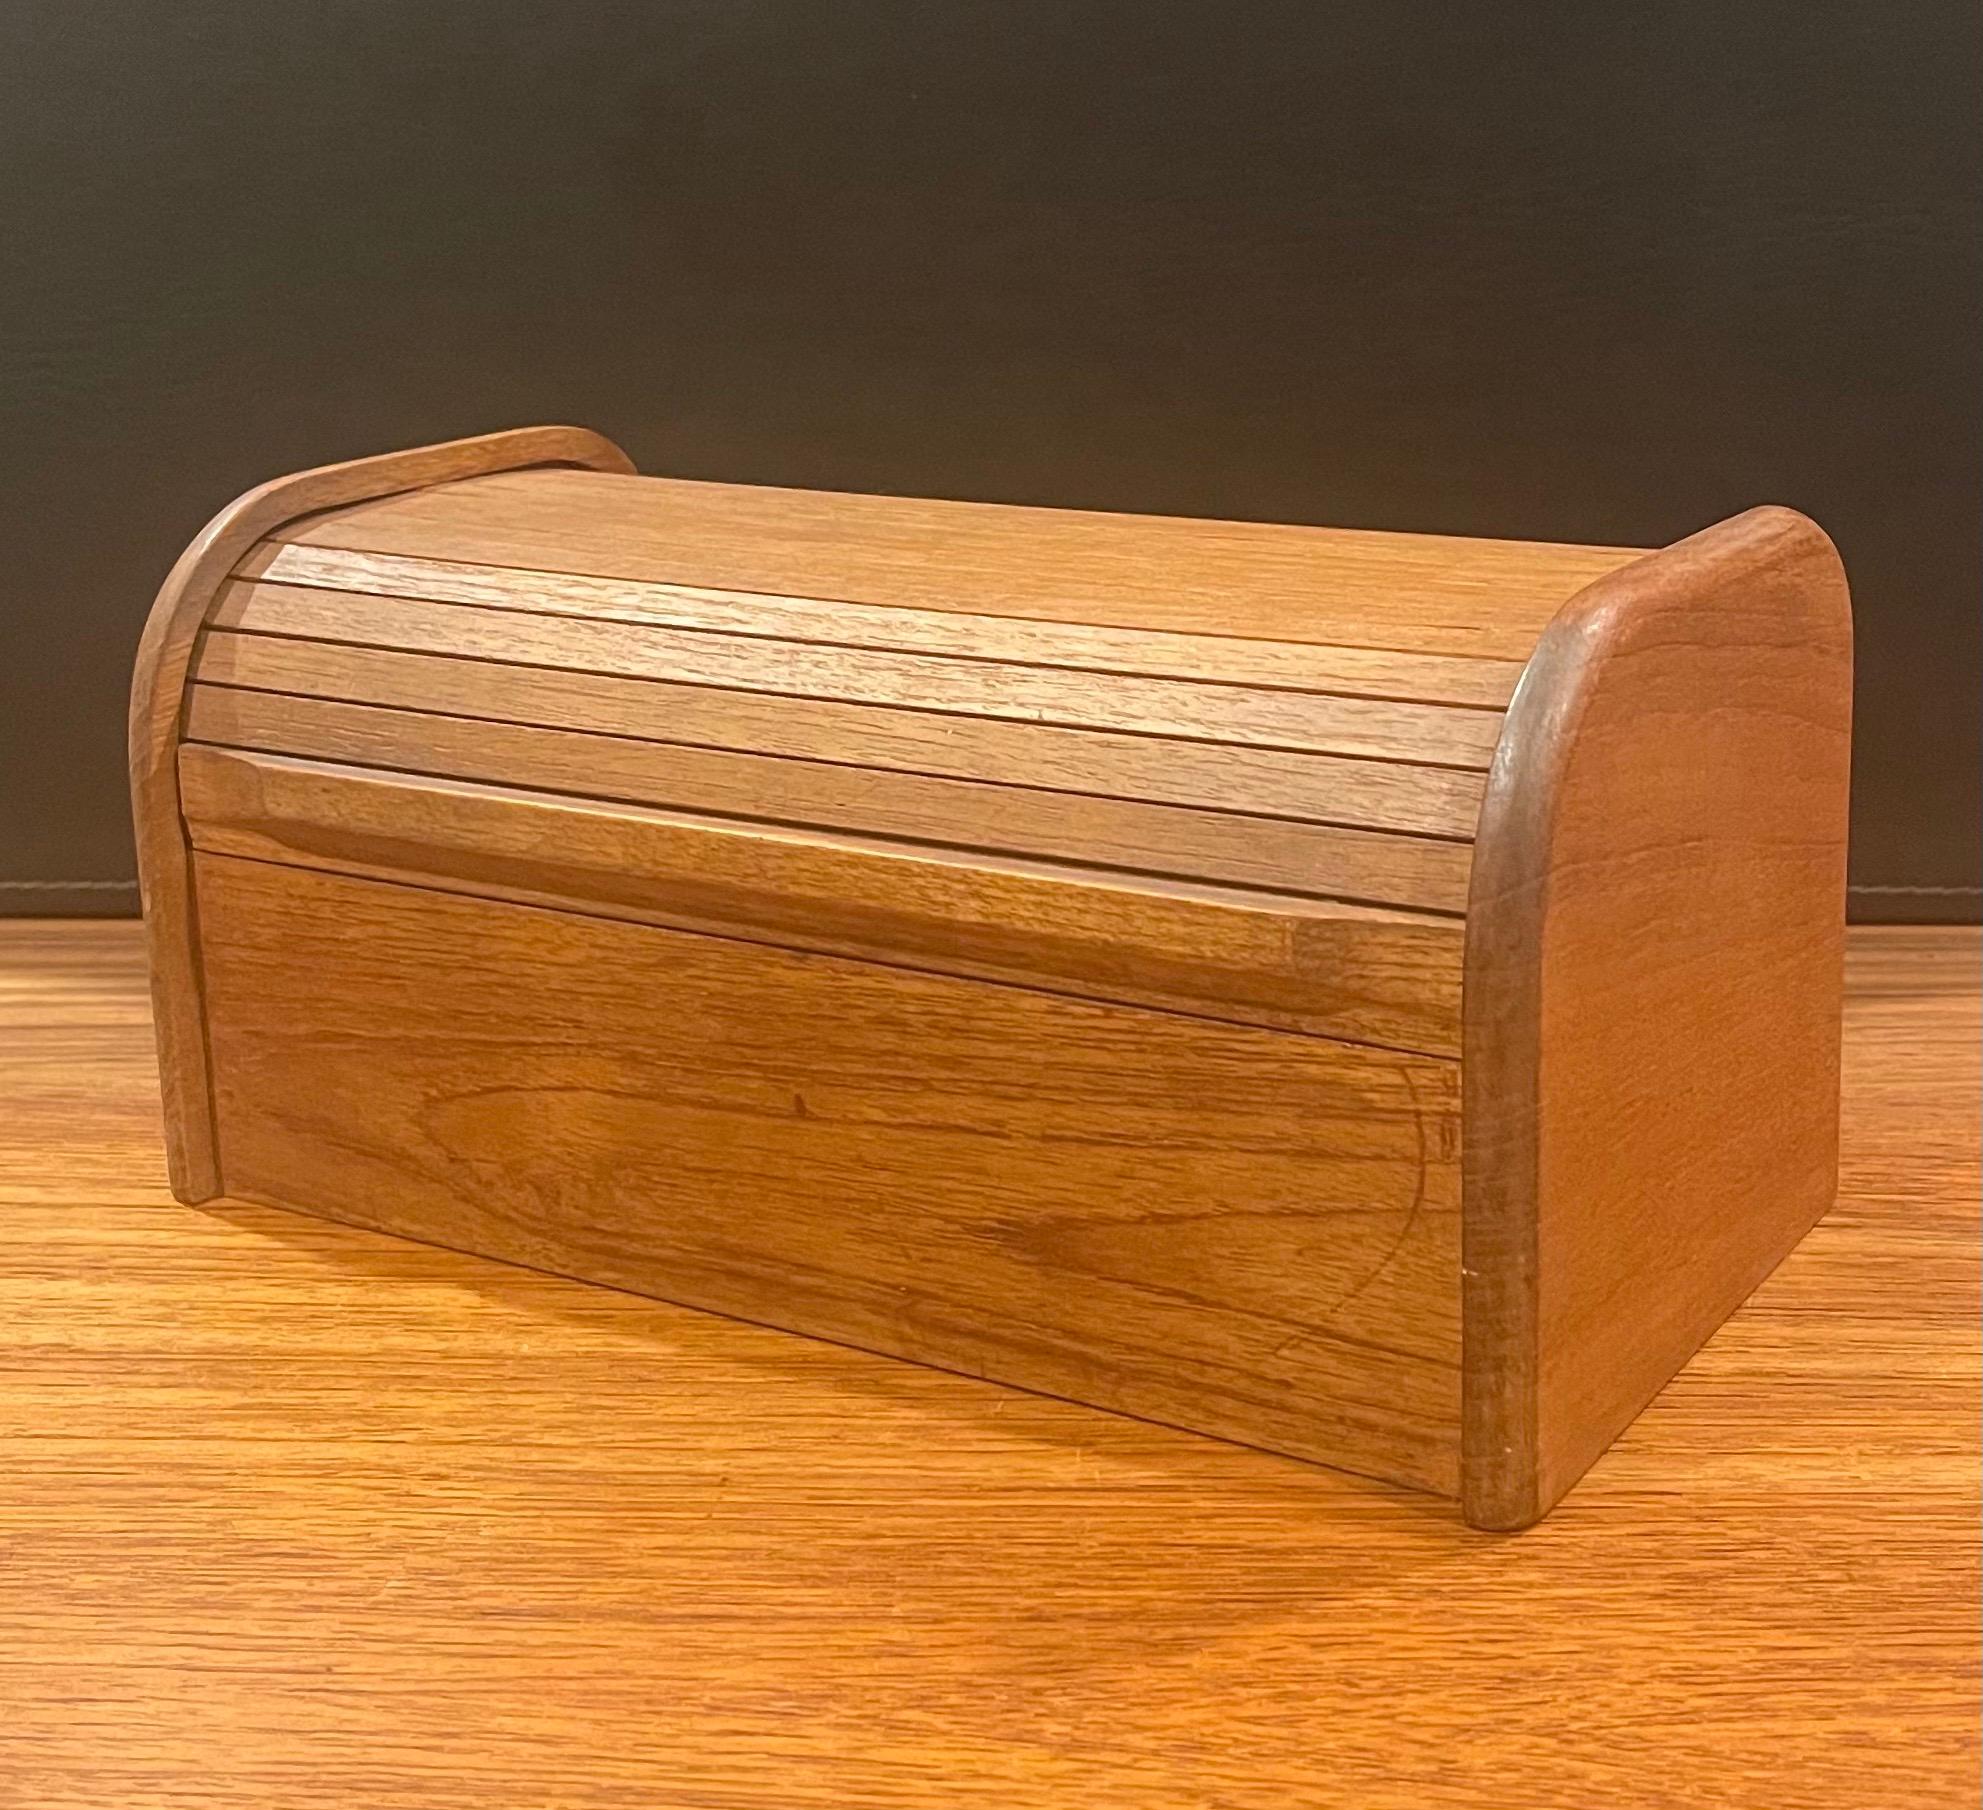 Small Danish modern solid teak tambour door trinket box, circa 1970s. This beautiful well crafted roll top desk box is great for stinkets or storage. The piece is in very good vintage condition and measures 11.5